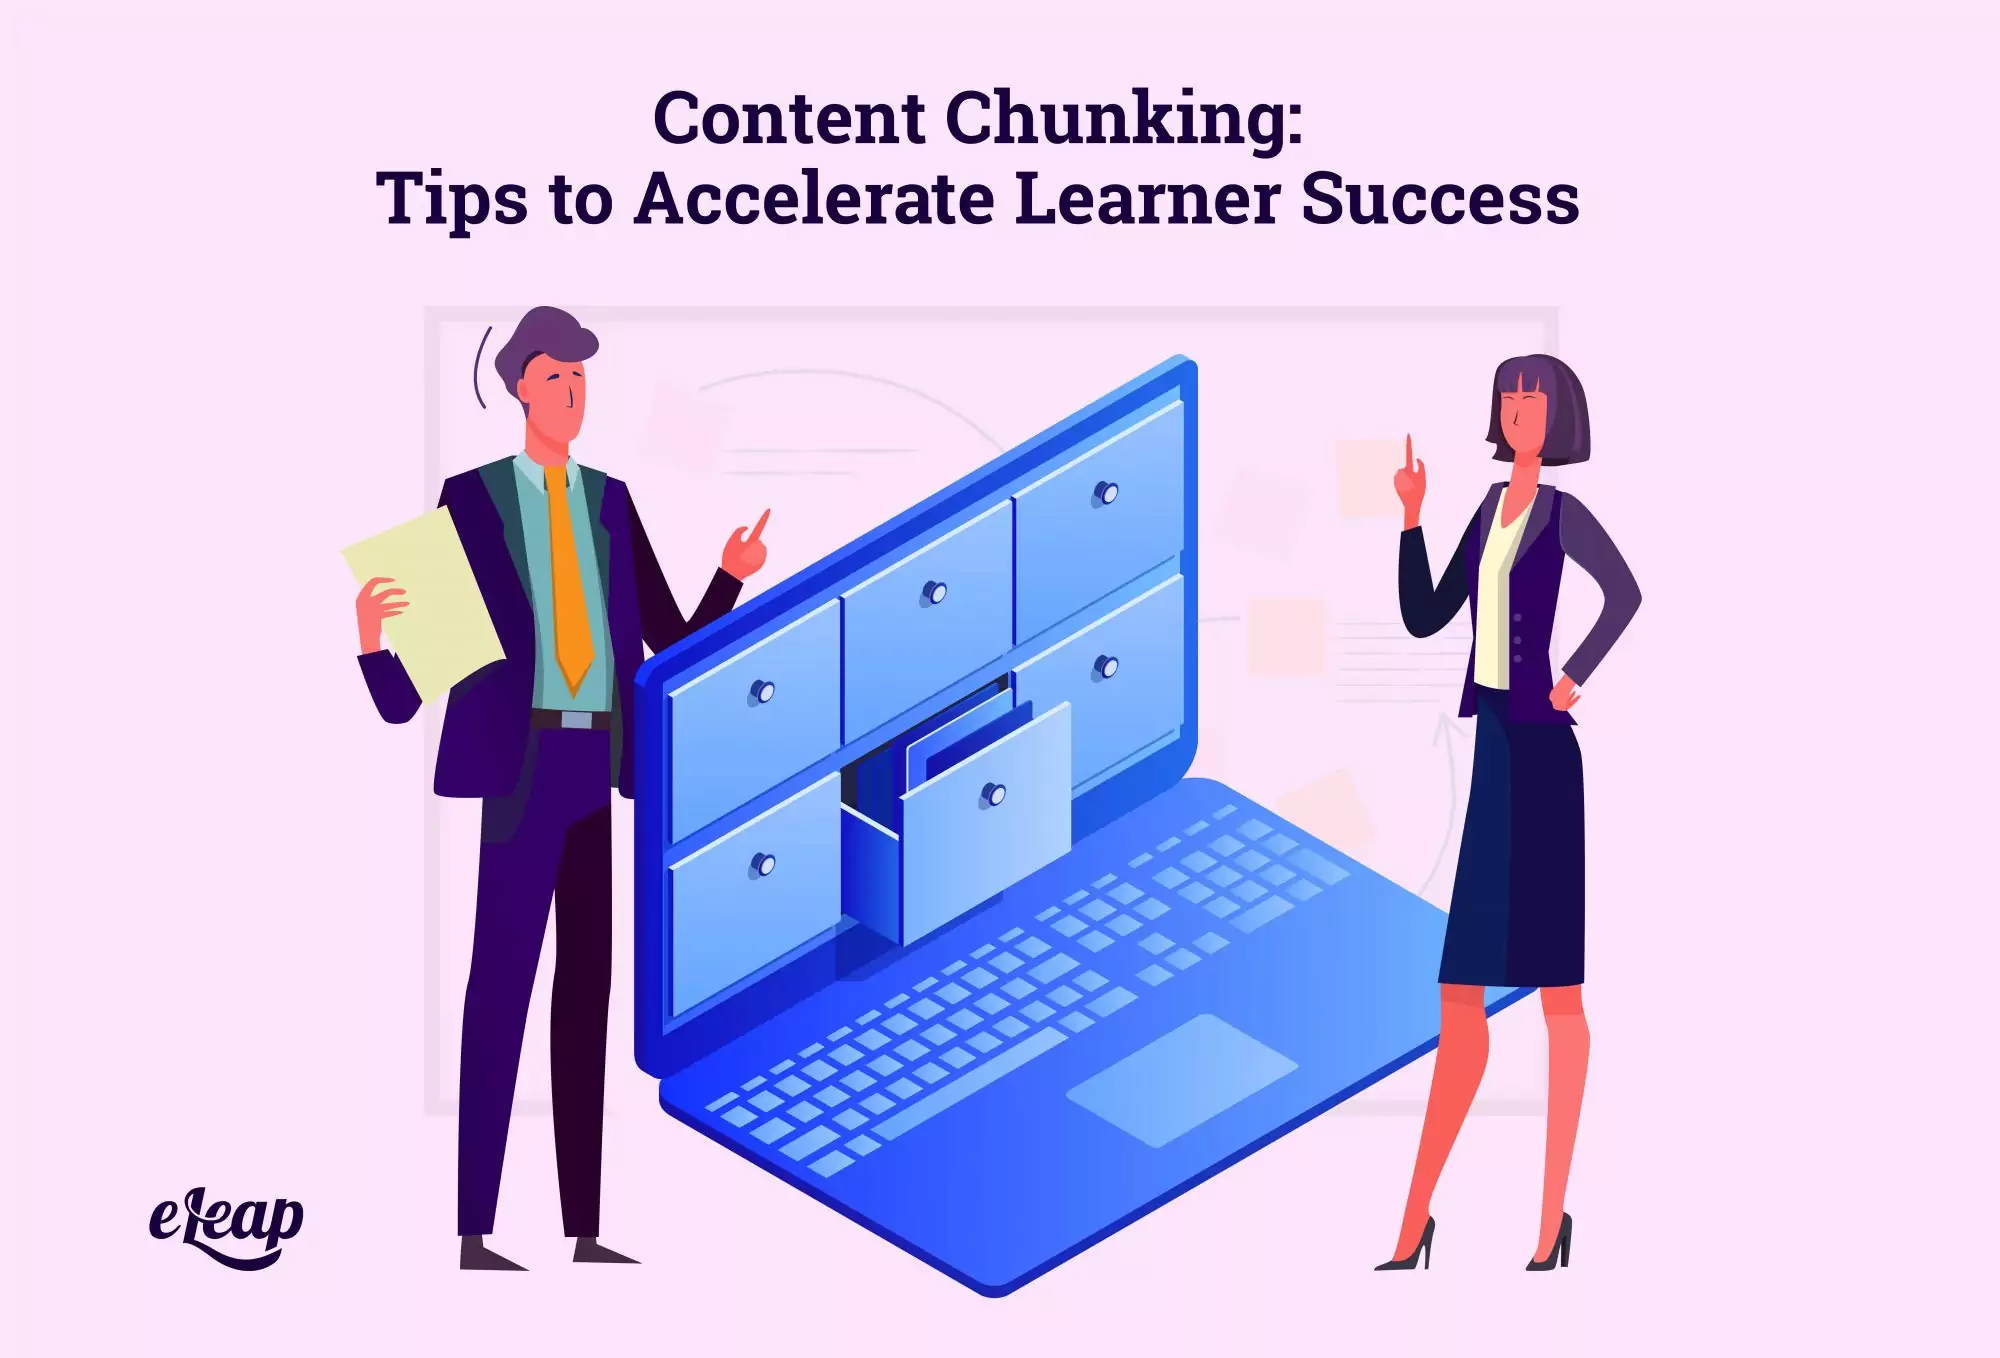 Content Chunking: Tips to Accelerate Learner Success